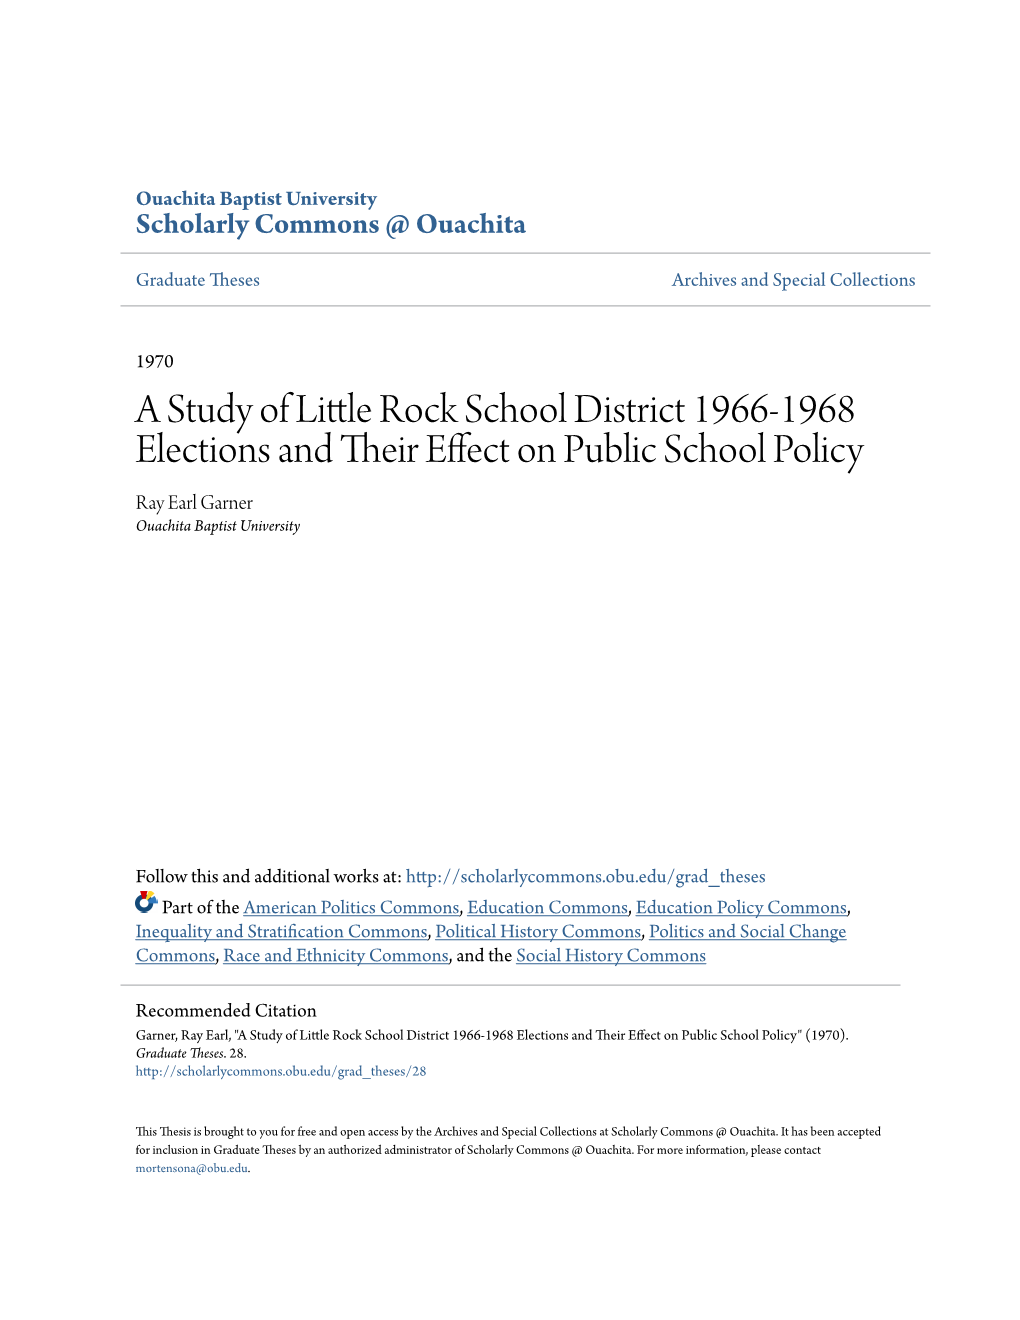 A Study of Little Rock School District 1966-1968 Elections and Their Ffece T on Public School Policy Ray Earl Garner Ouachita Baptist University